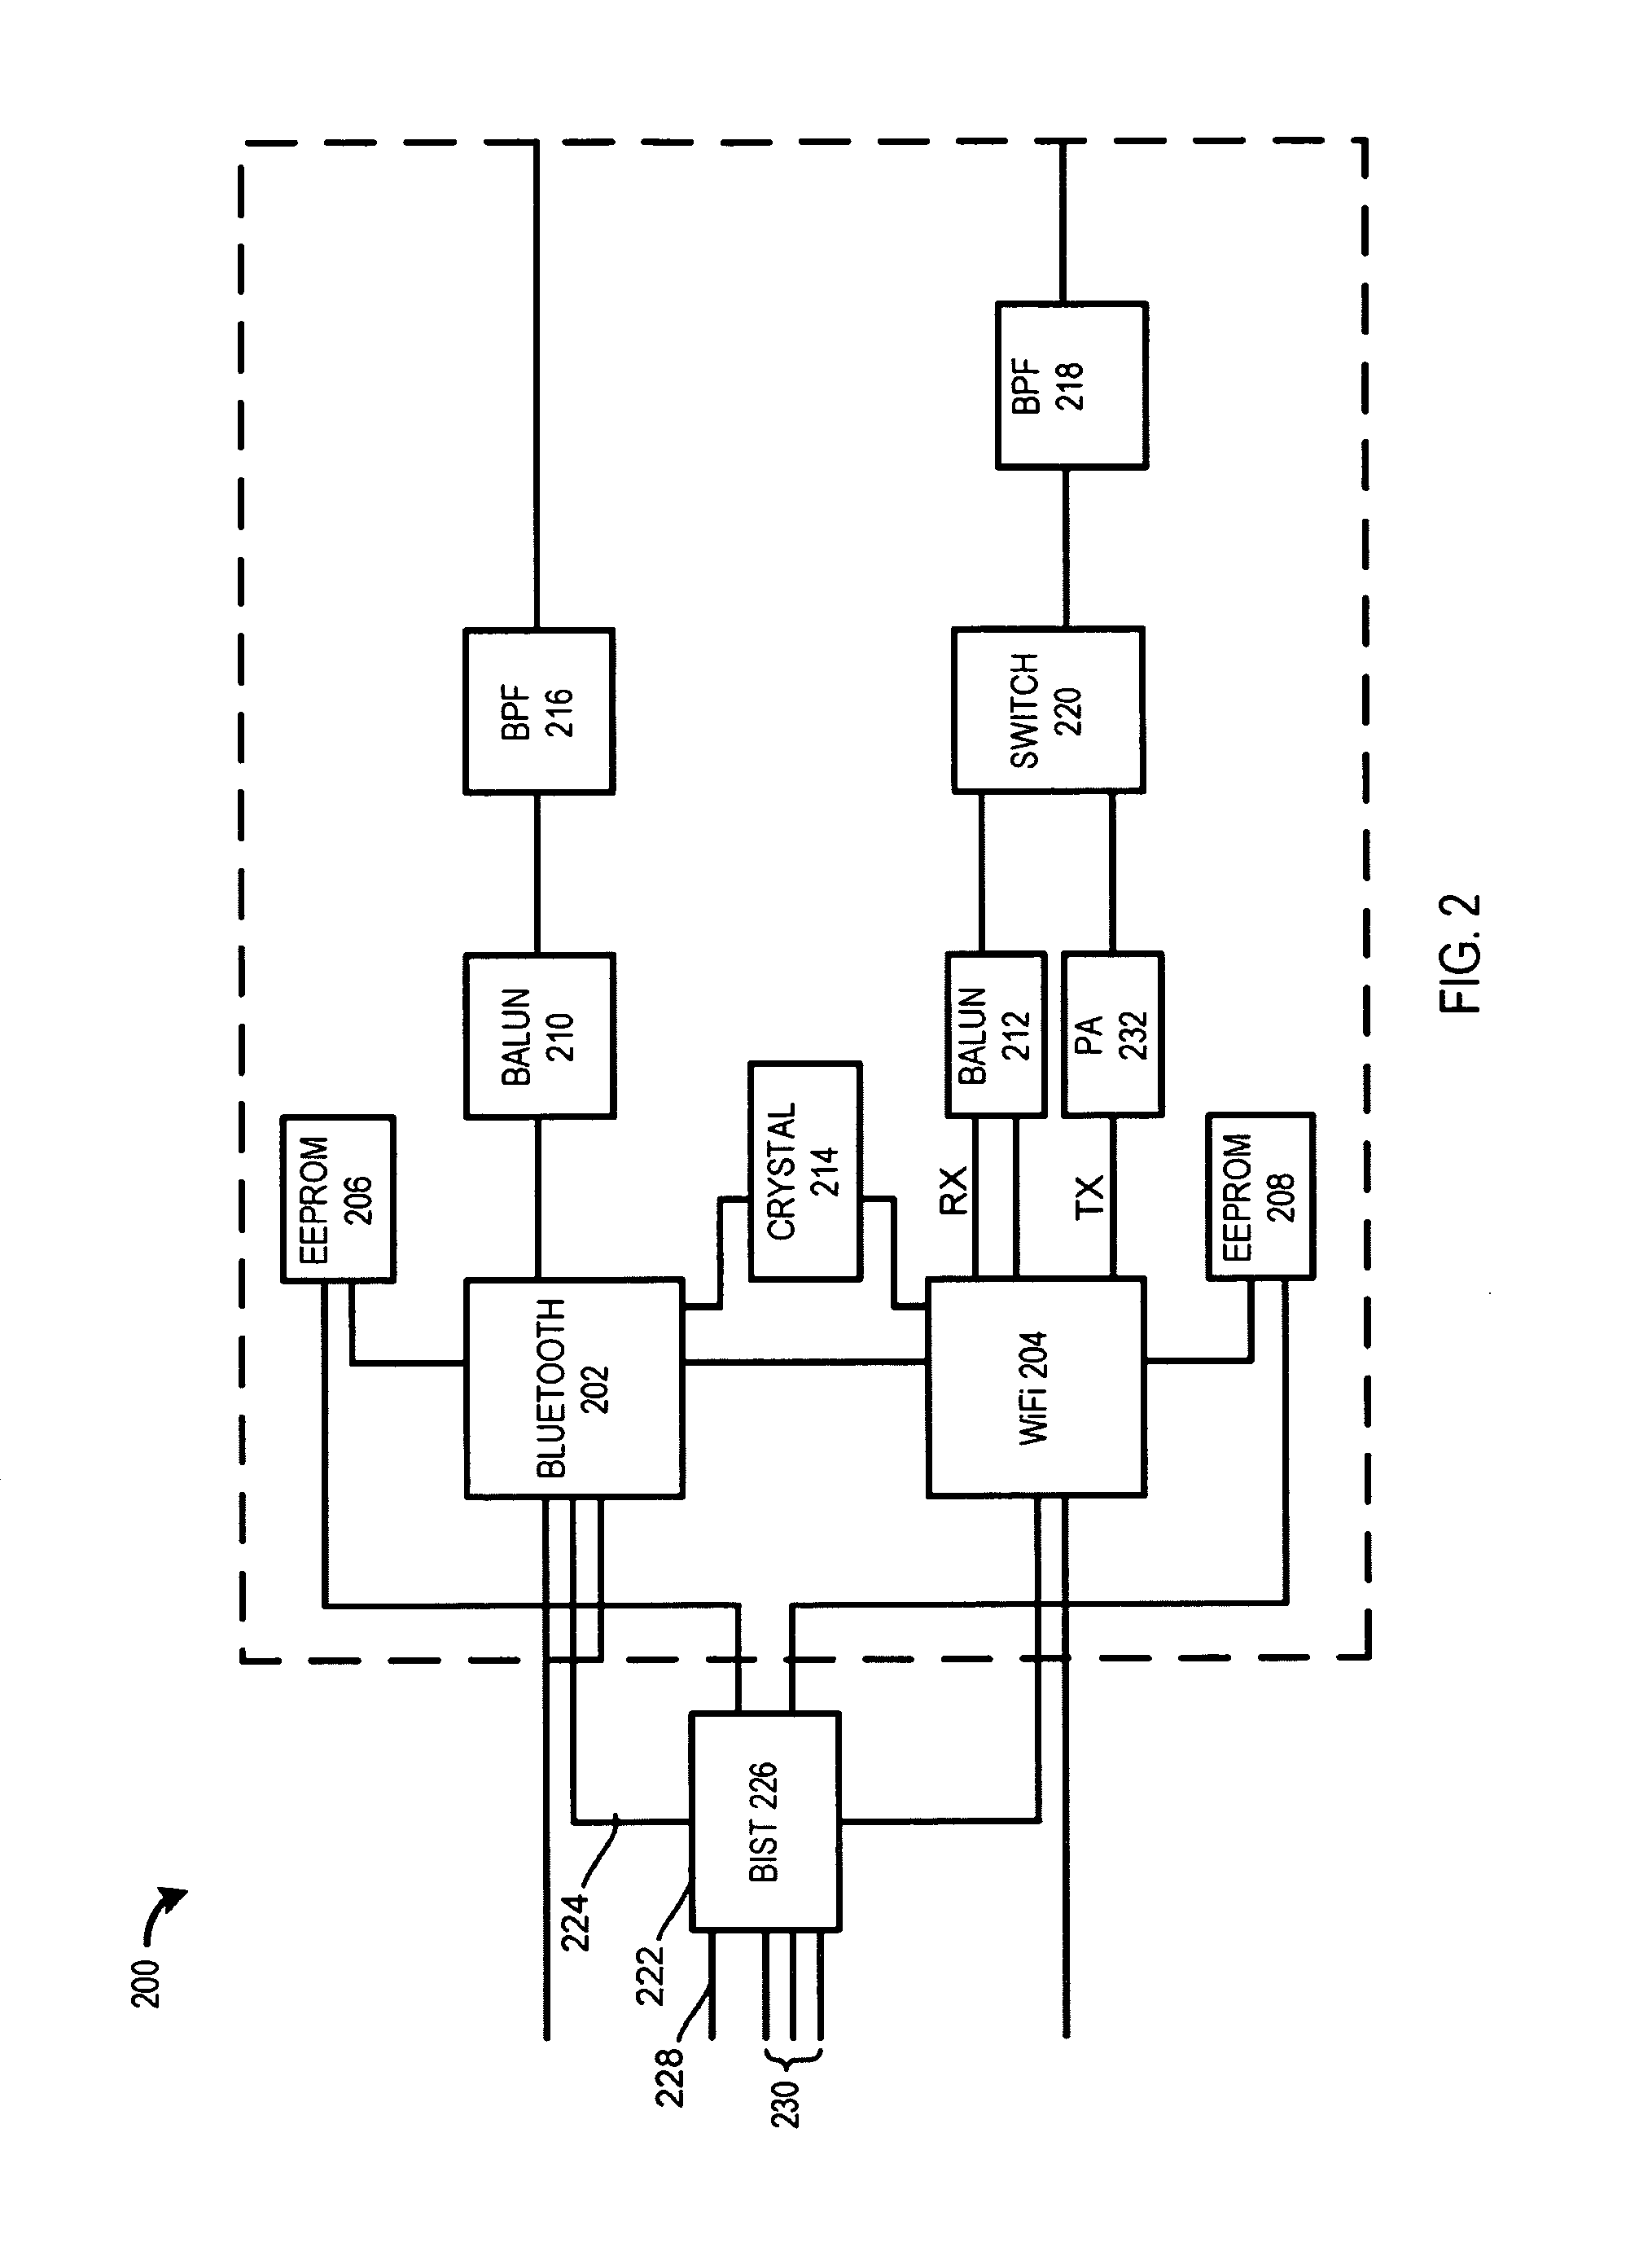 Built-in-self-repair arrangement for a single multiple-integrated circuit package and methods thereof